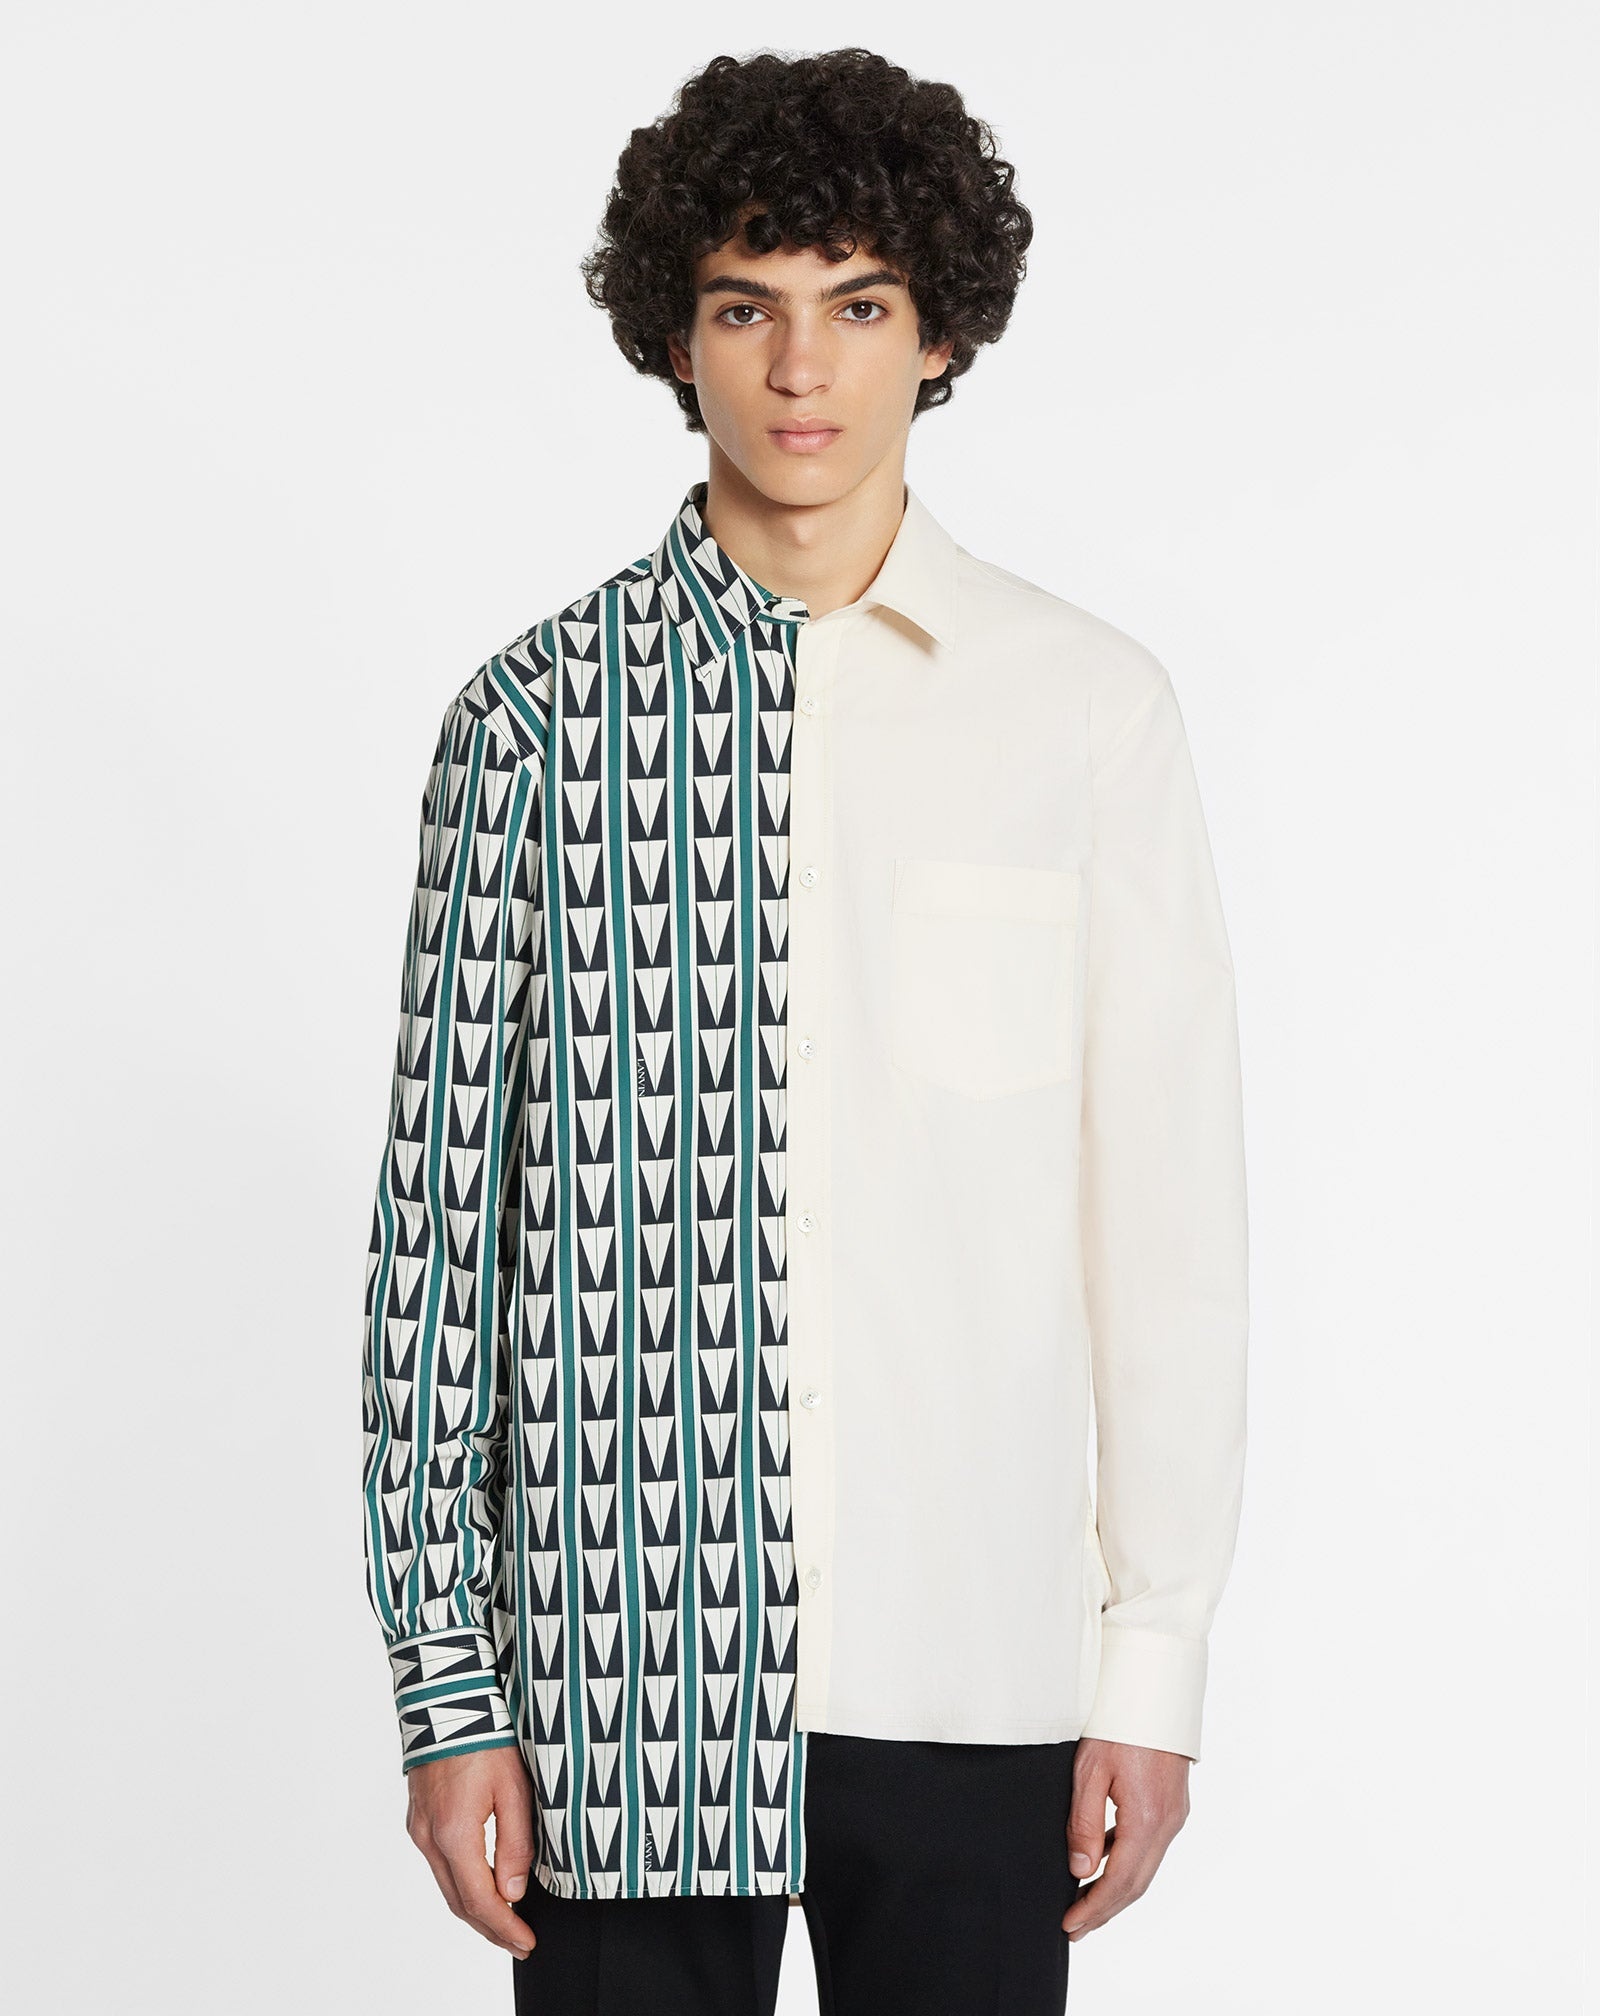 DUAL-PRINT SHIRT WITH ART DECO-INSPIRED TRIANGLES - 3